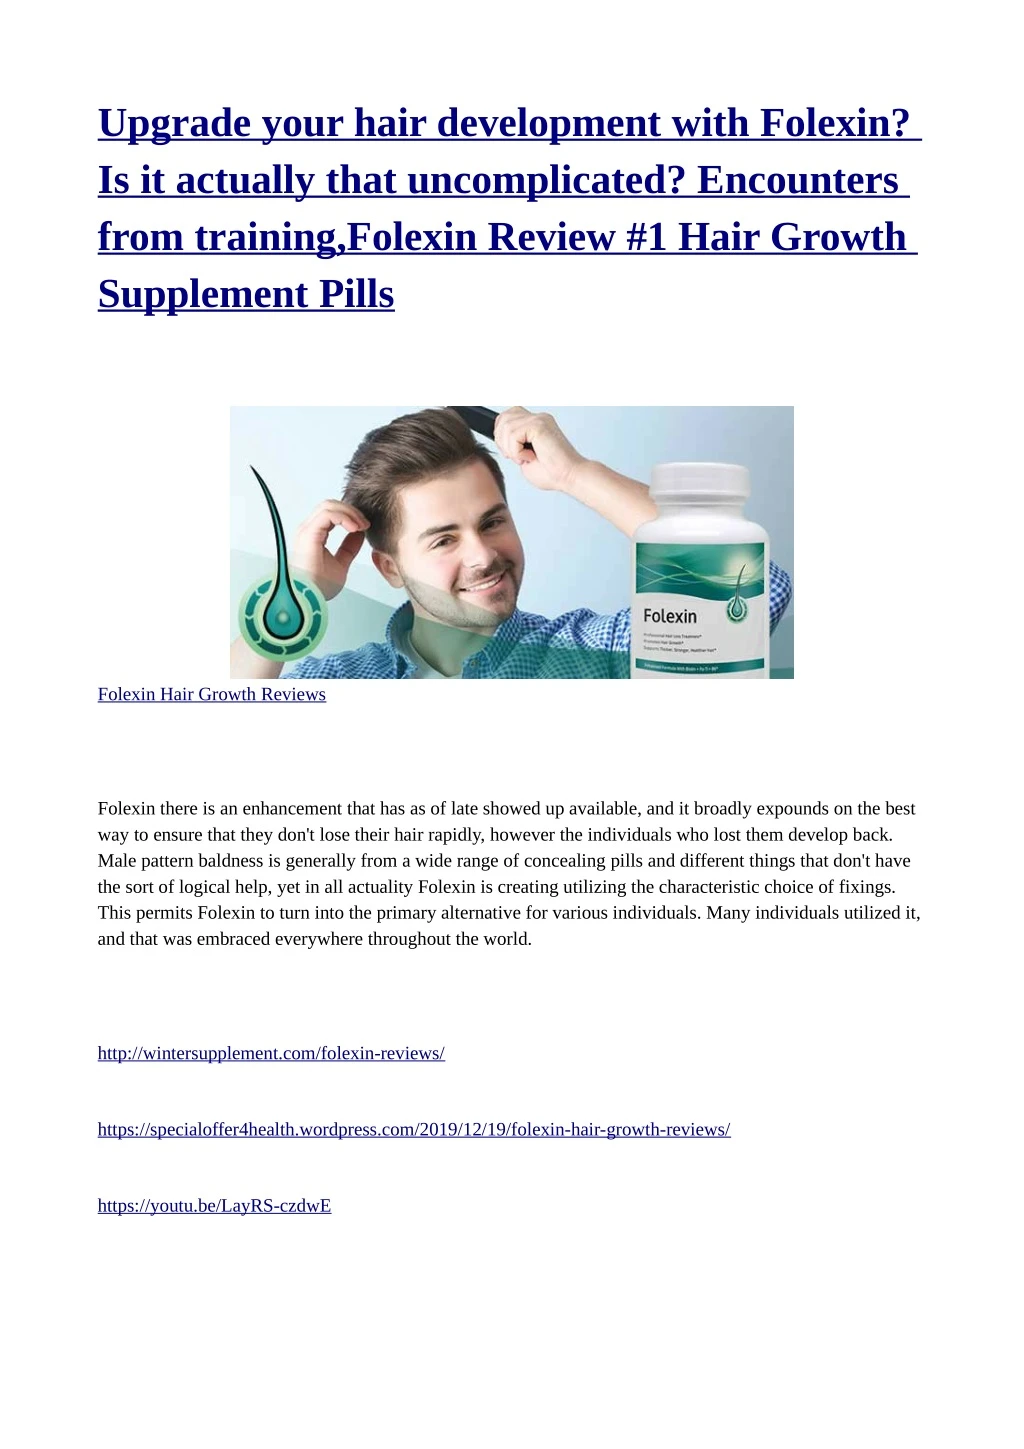 upgrade your hair development with folexin